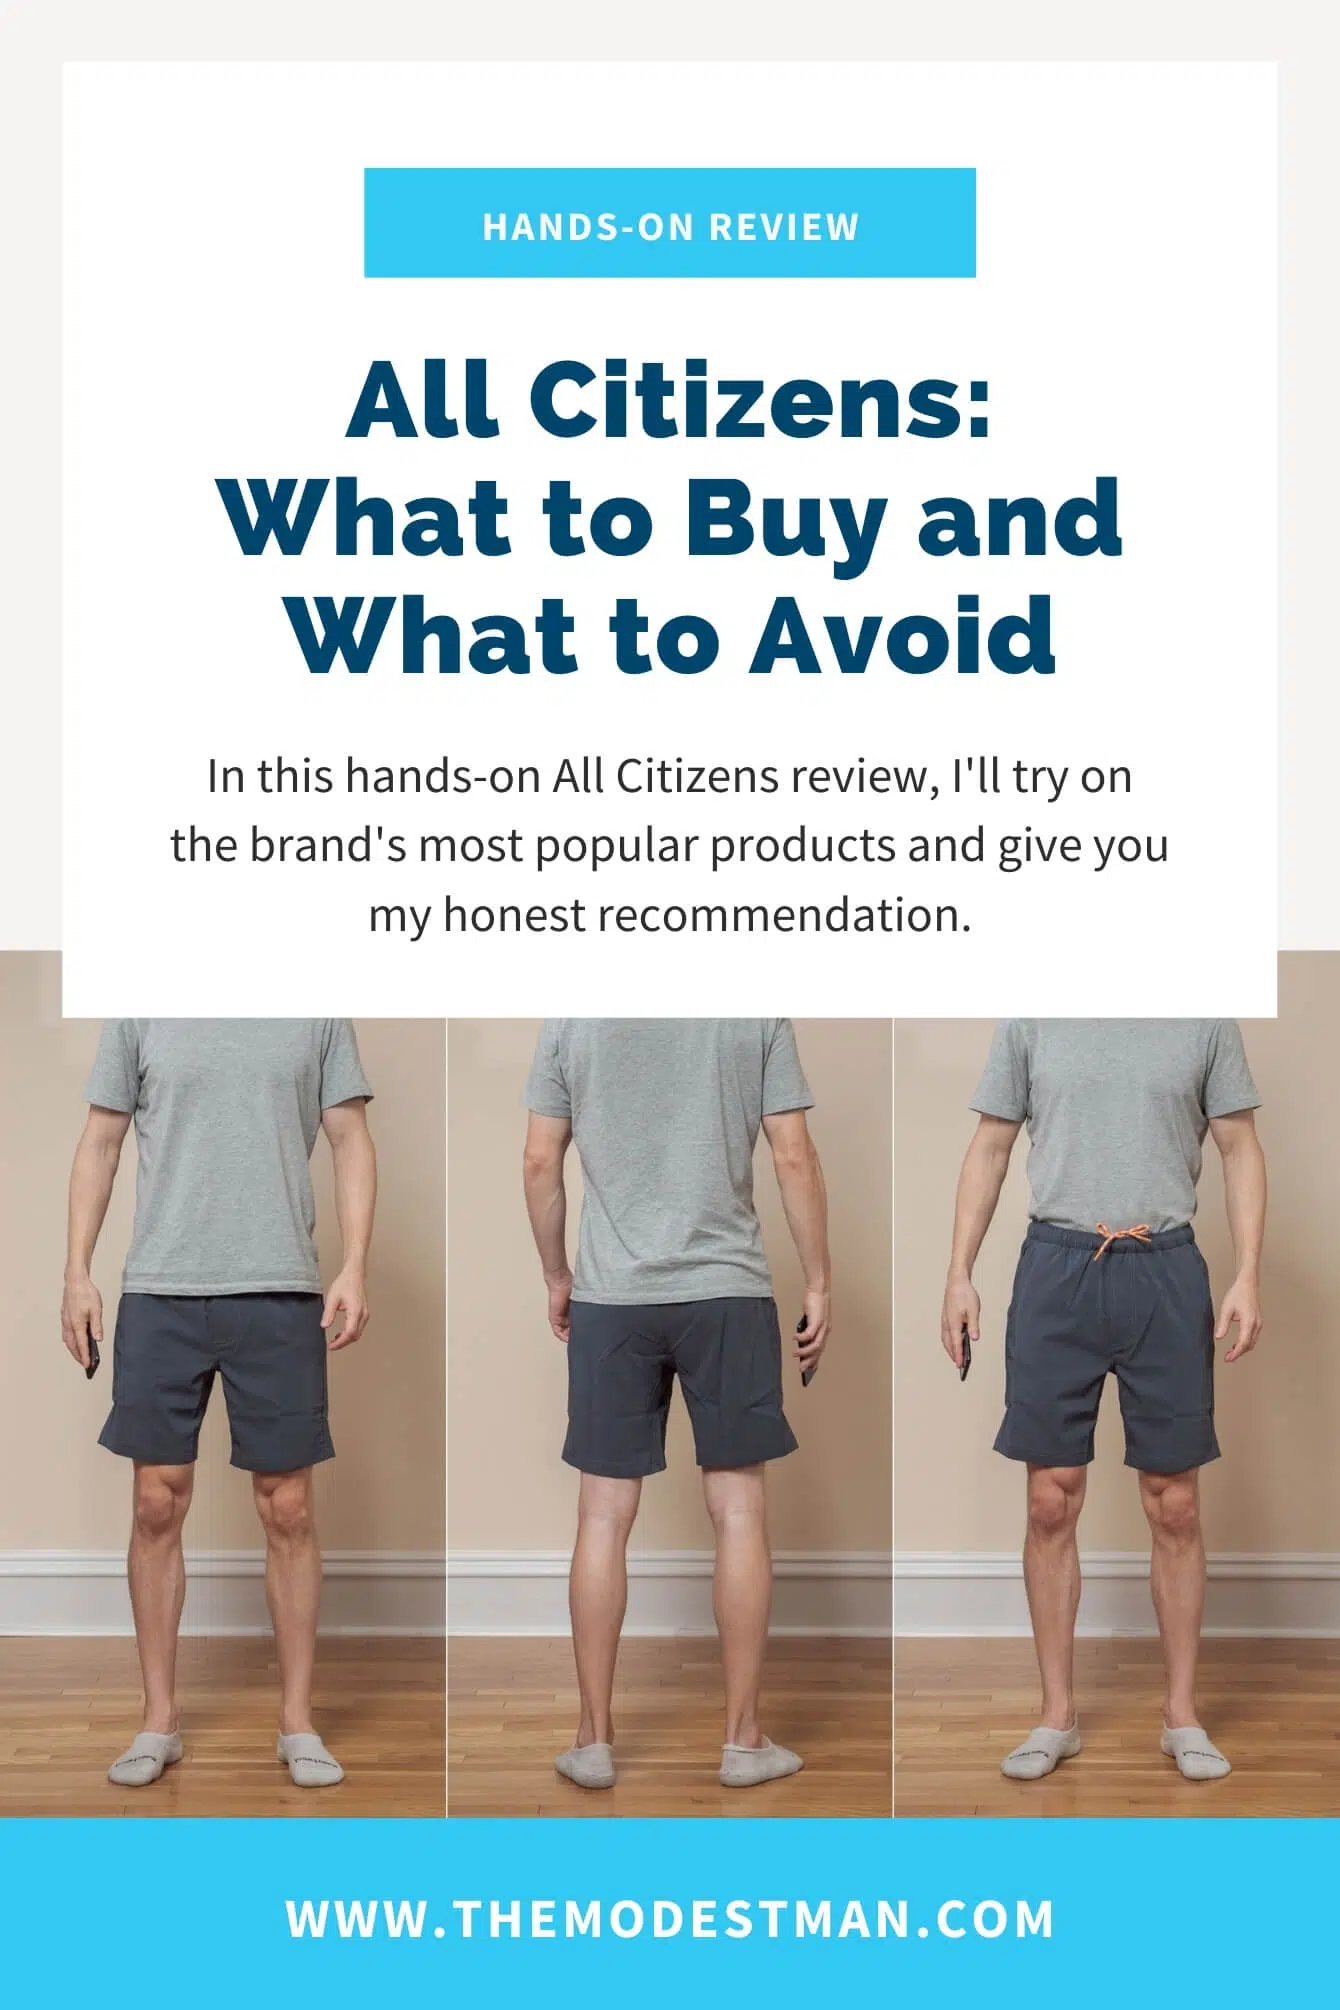 All Citizens Review